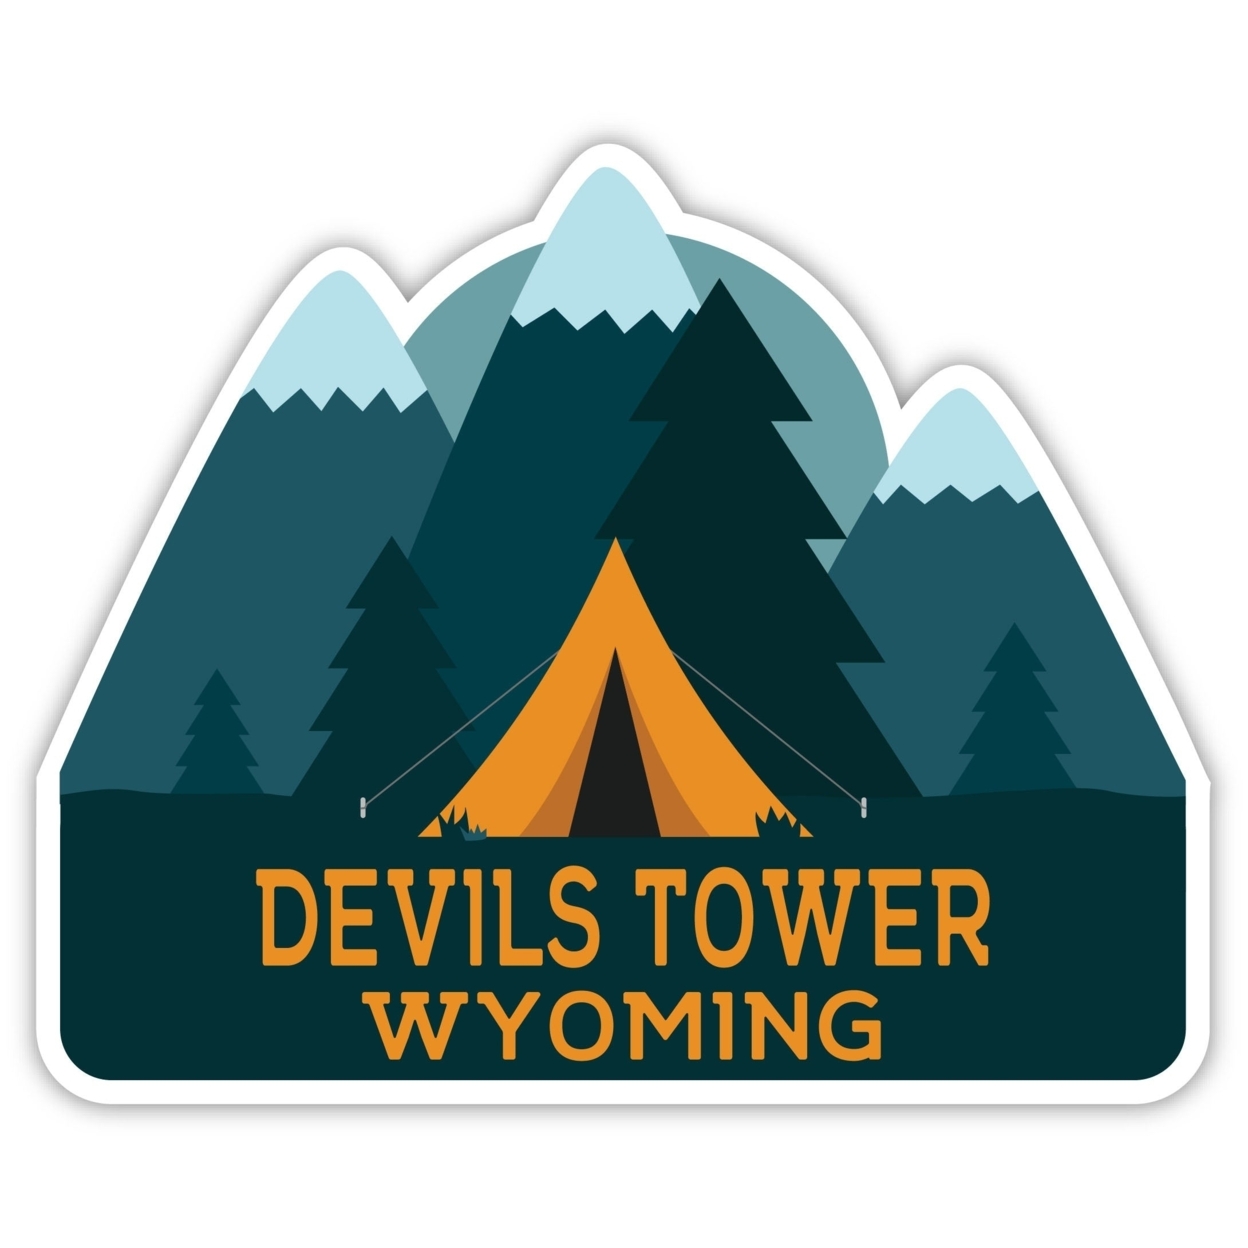 Devils Tower Wyoming Souvenir Decorative Stickers (Choose Theme And Size) - Single Unit, 2-Inch, Bear